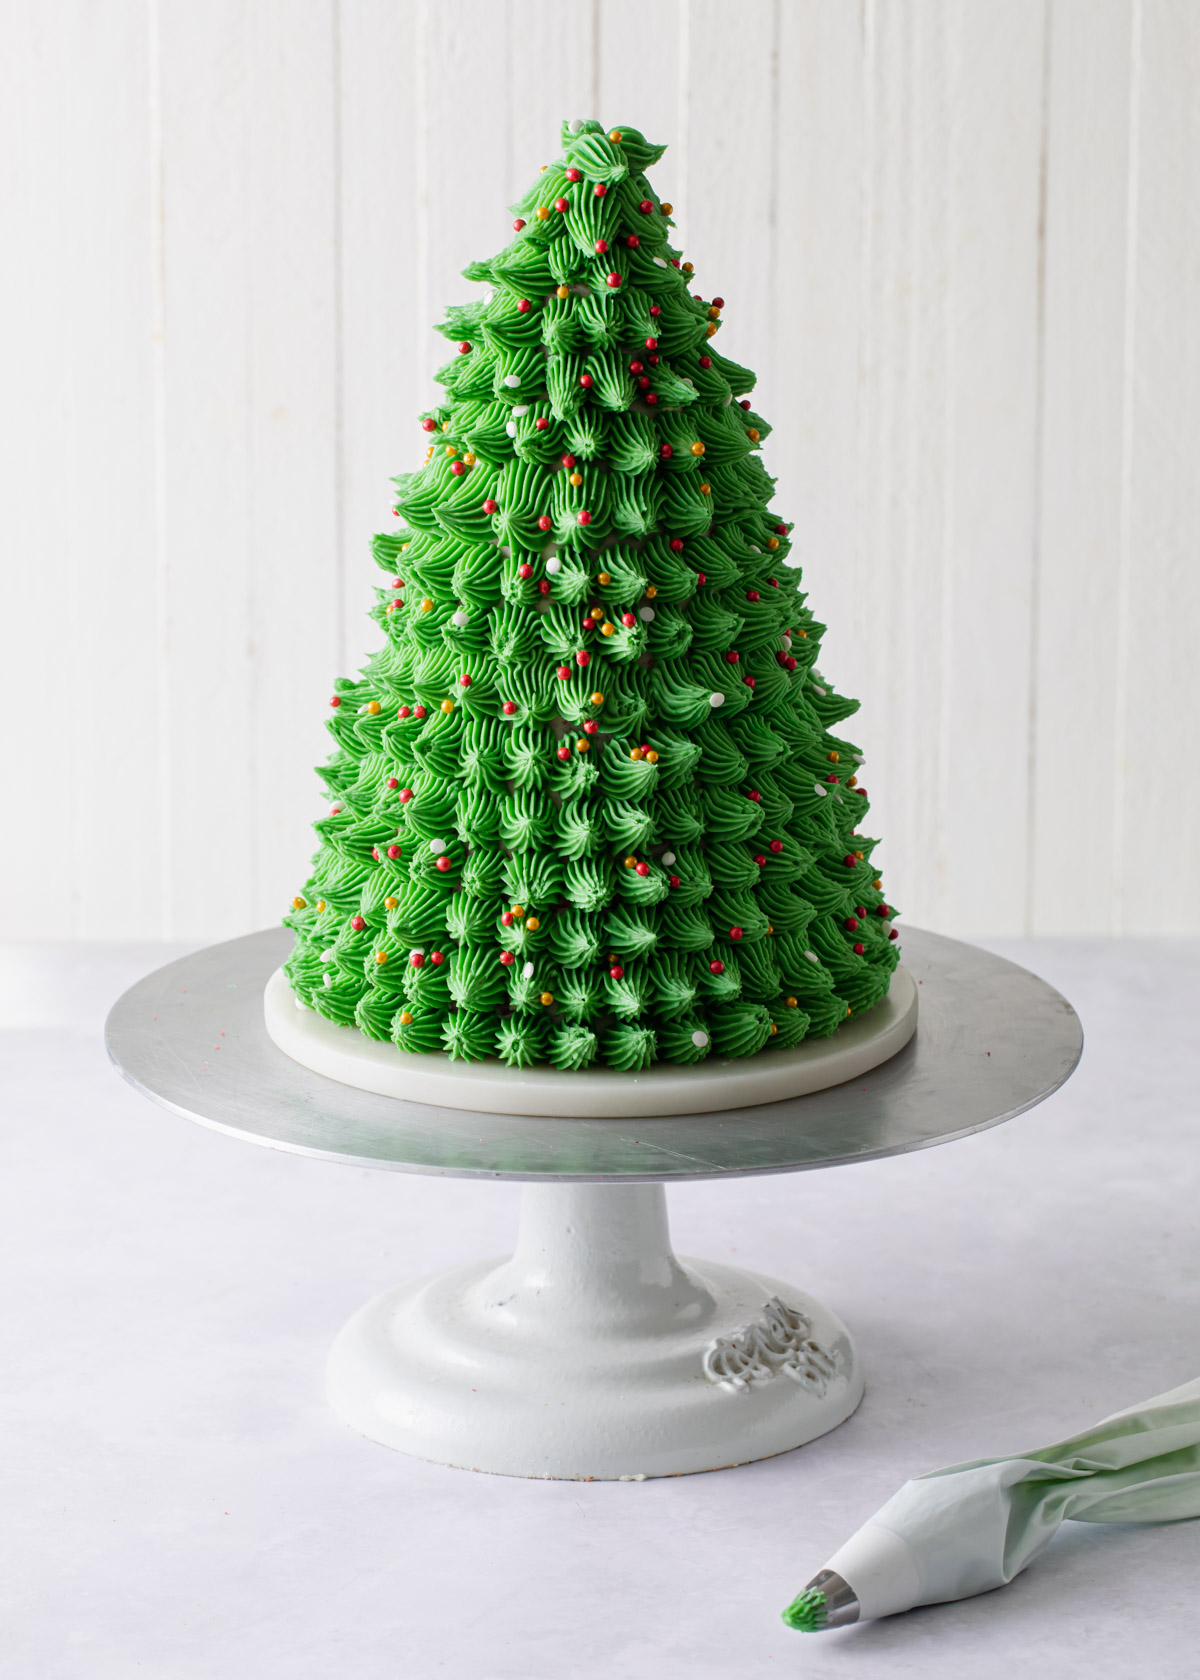 A Christmas tree cake covered in piped green buttercream.
